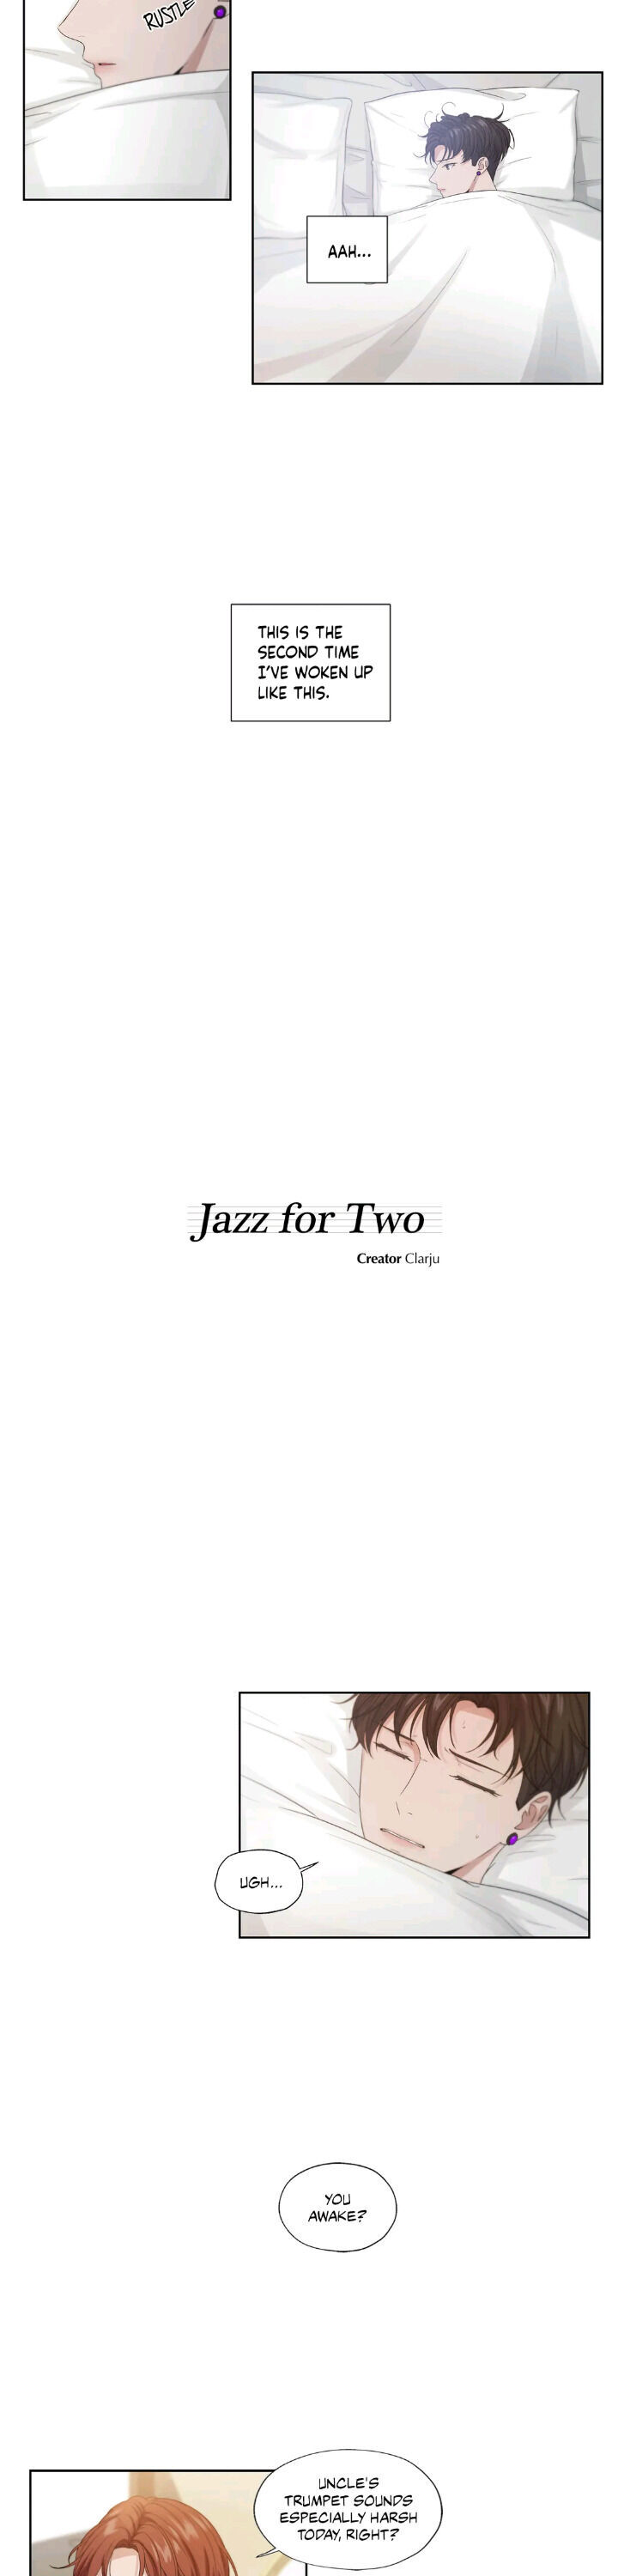 Jazz For Two - Page 2